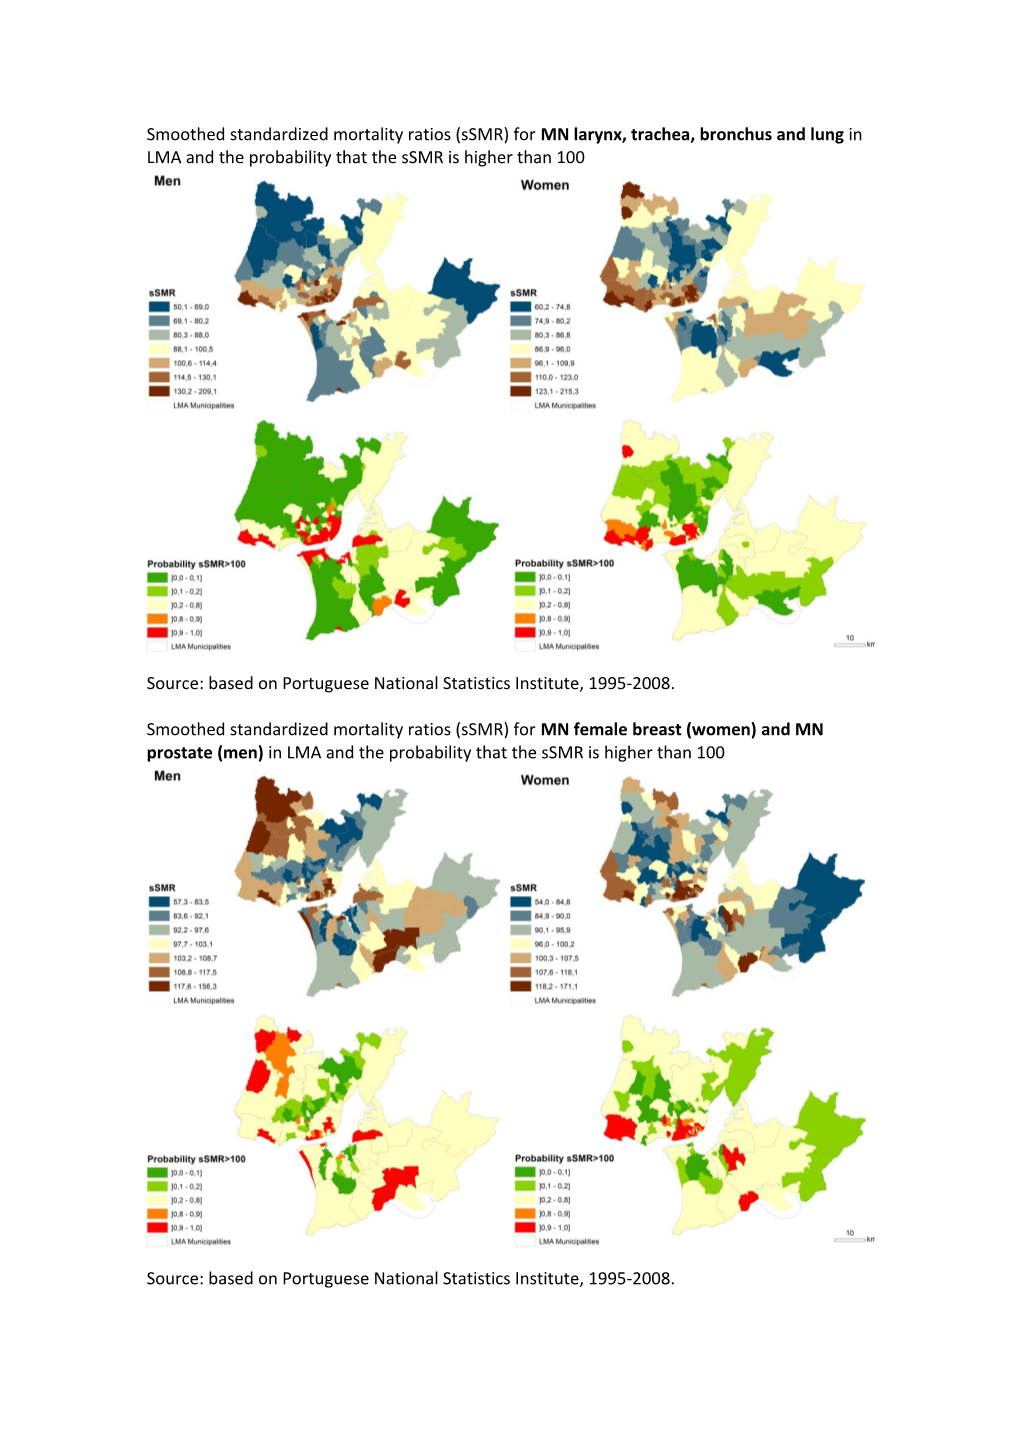 Additional File: Maps of Smoothed Standardized Mortality Ratios (Ssmr) for Specific Cause